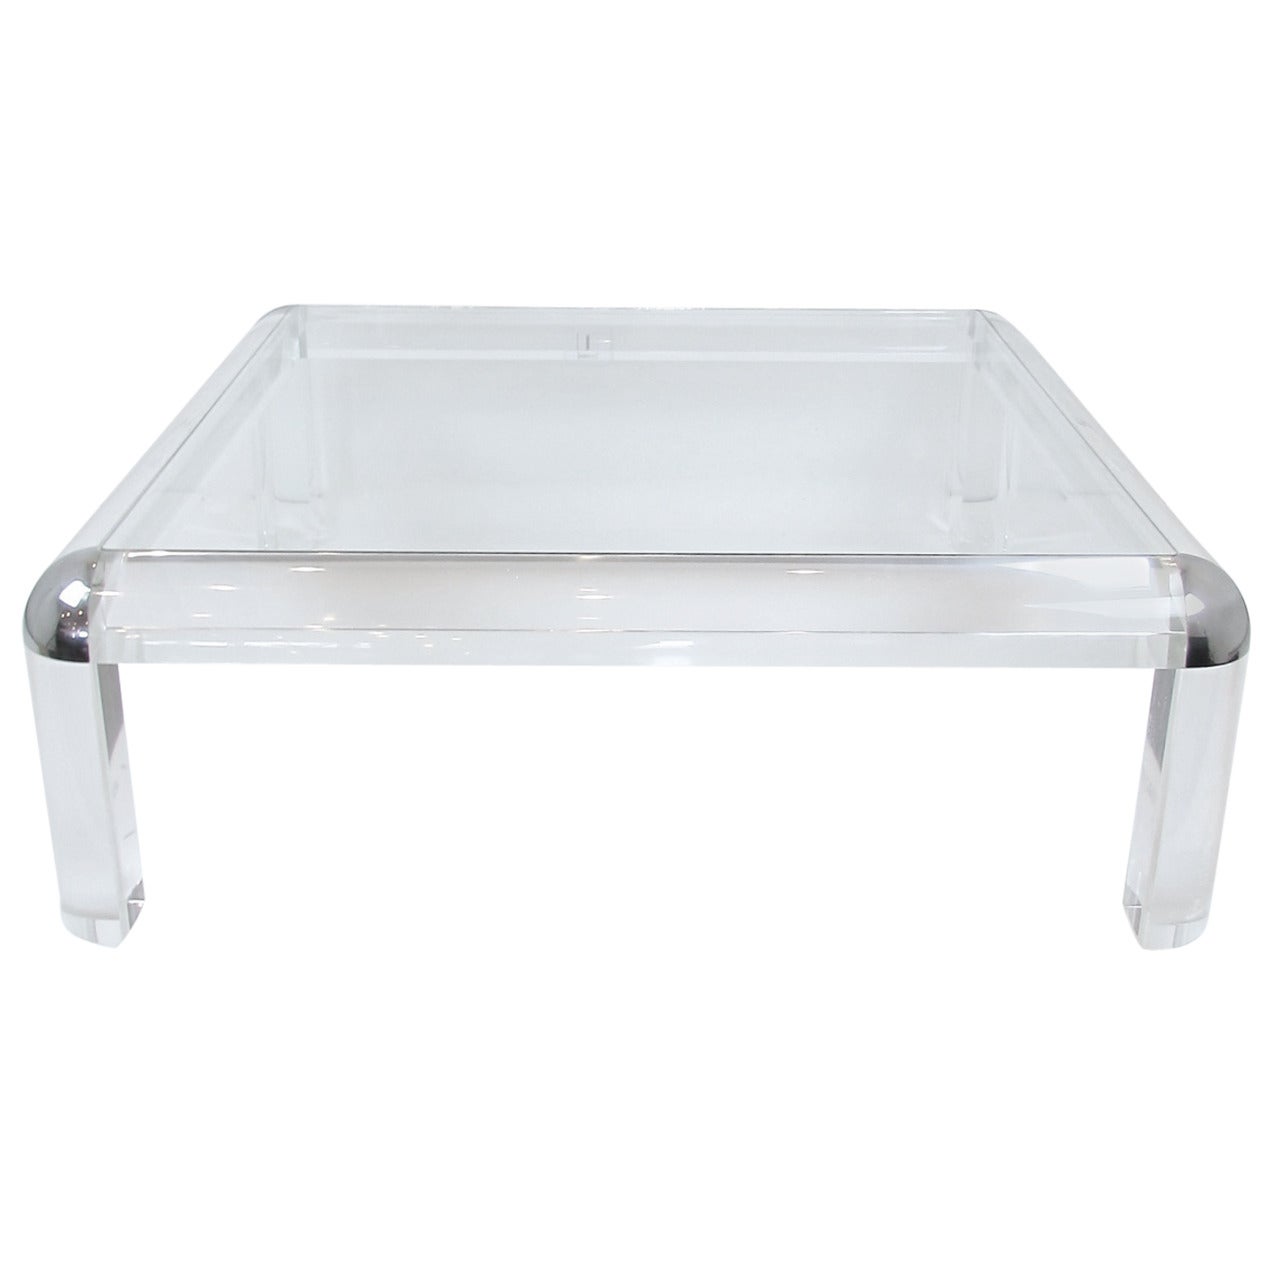 Karl Springer Style Acrylic and Chrome Coffee Table